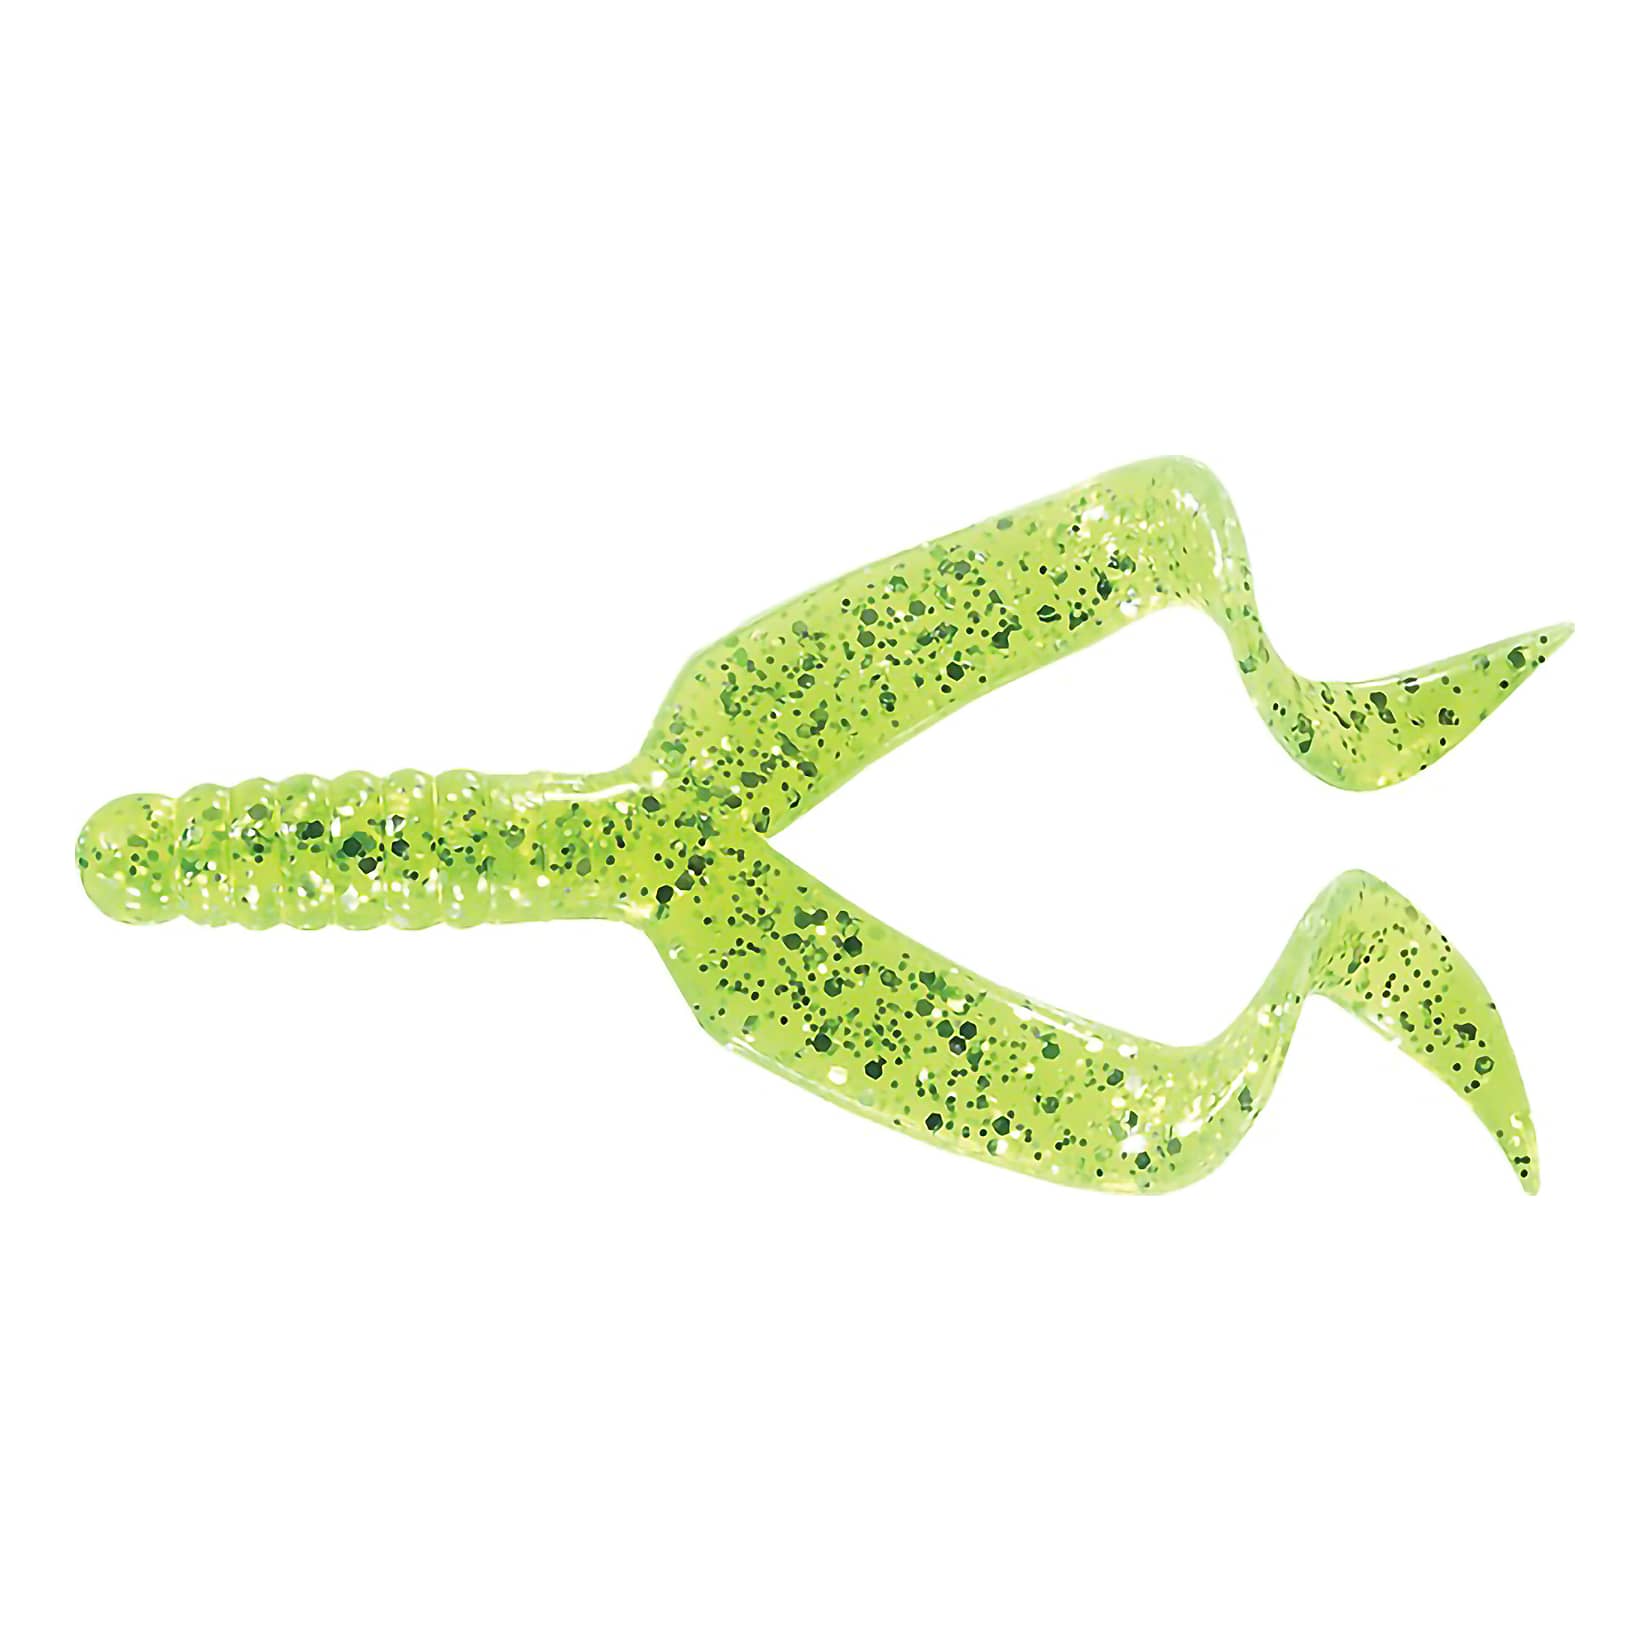 Mr. Twister Double Tail Lure – 10 Pack - Chartreuse Flake